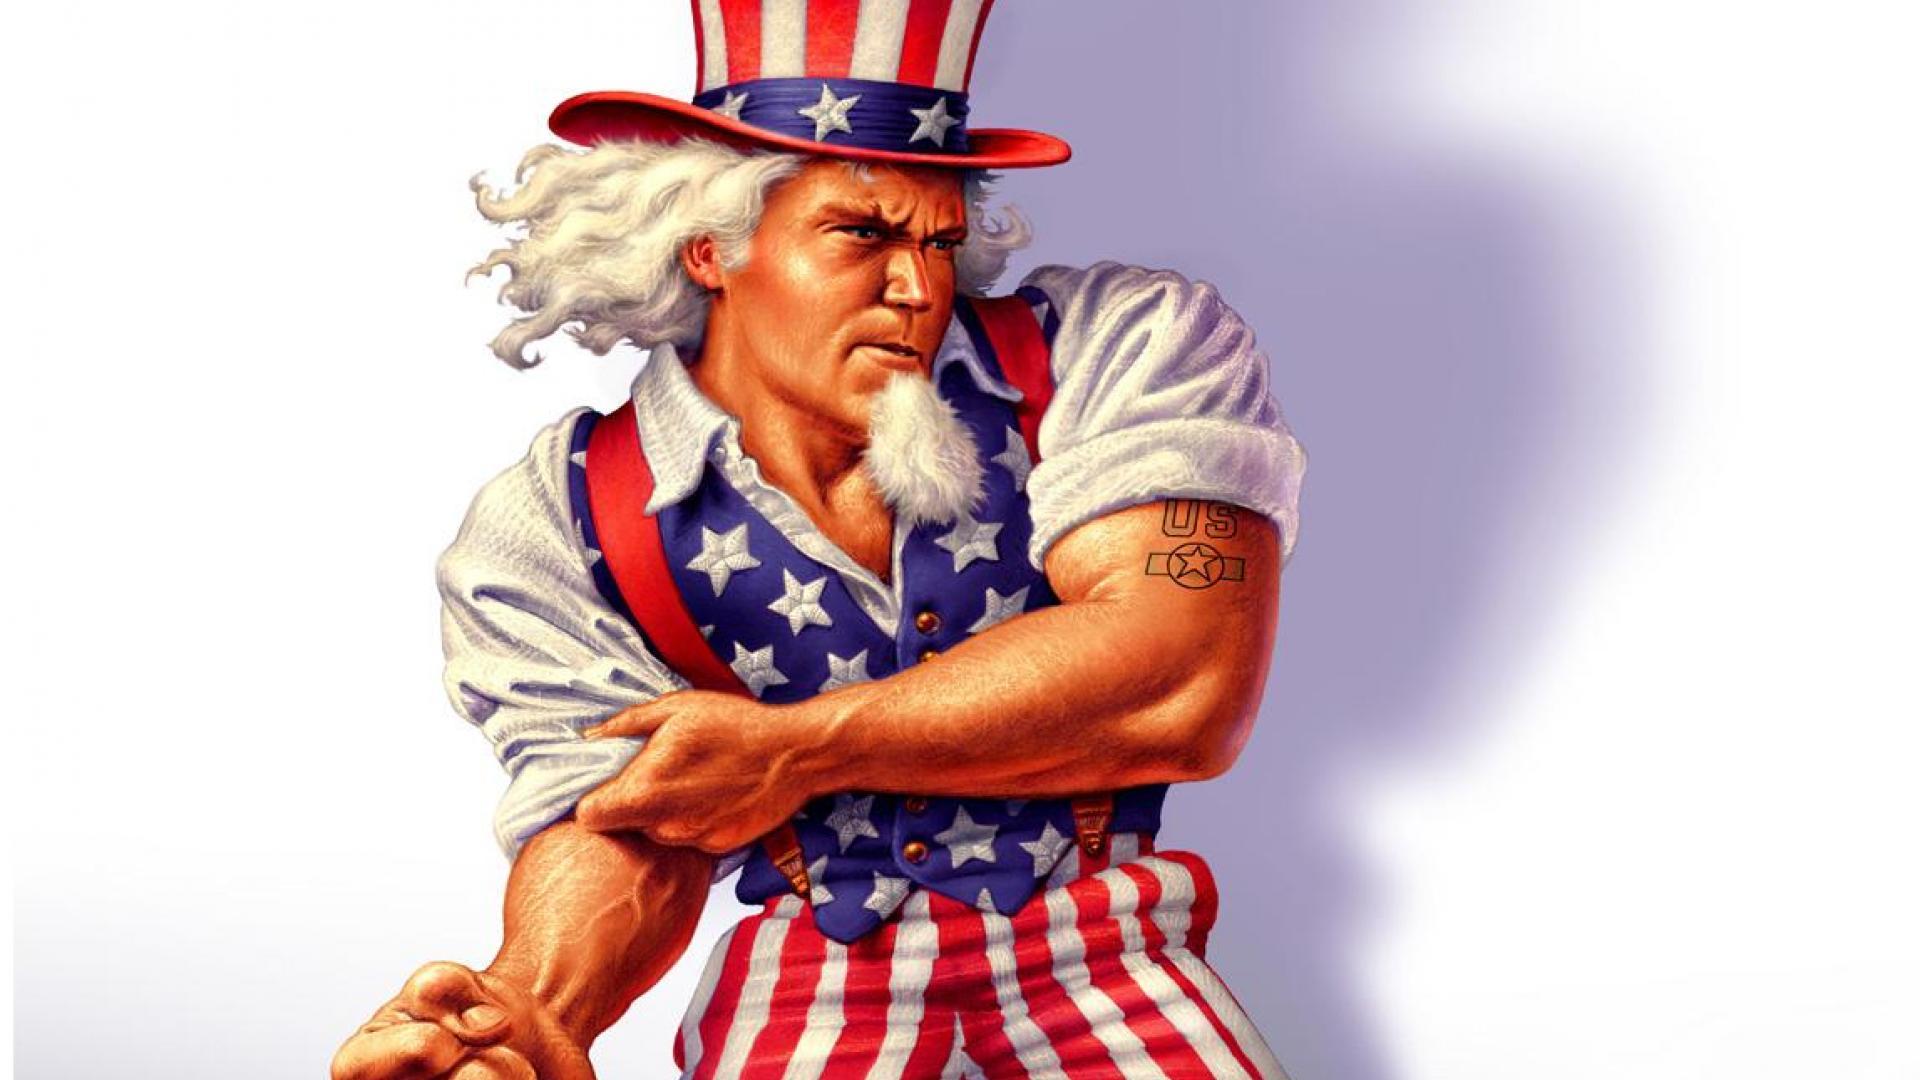 YEAH THAT S RIGHT I M UNCLE SAM WALLPAPER